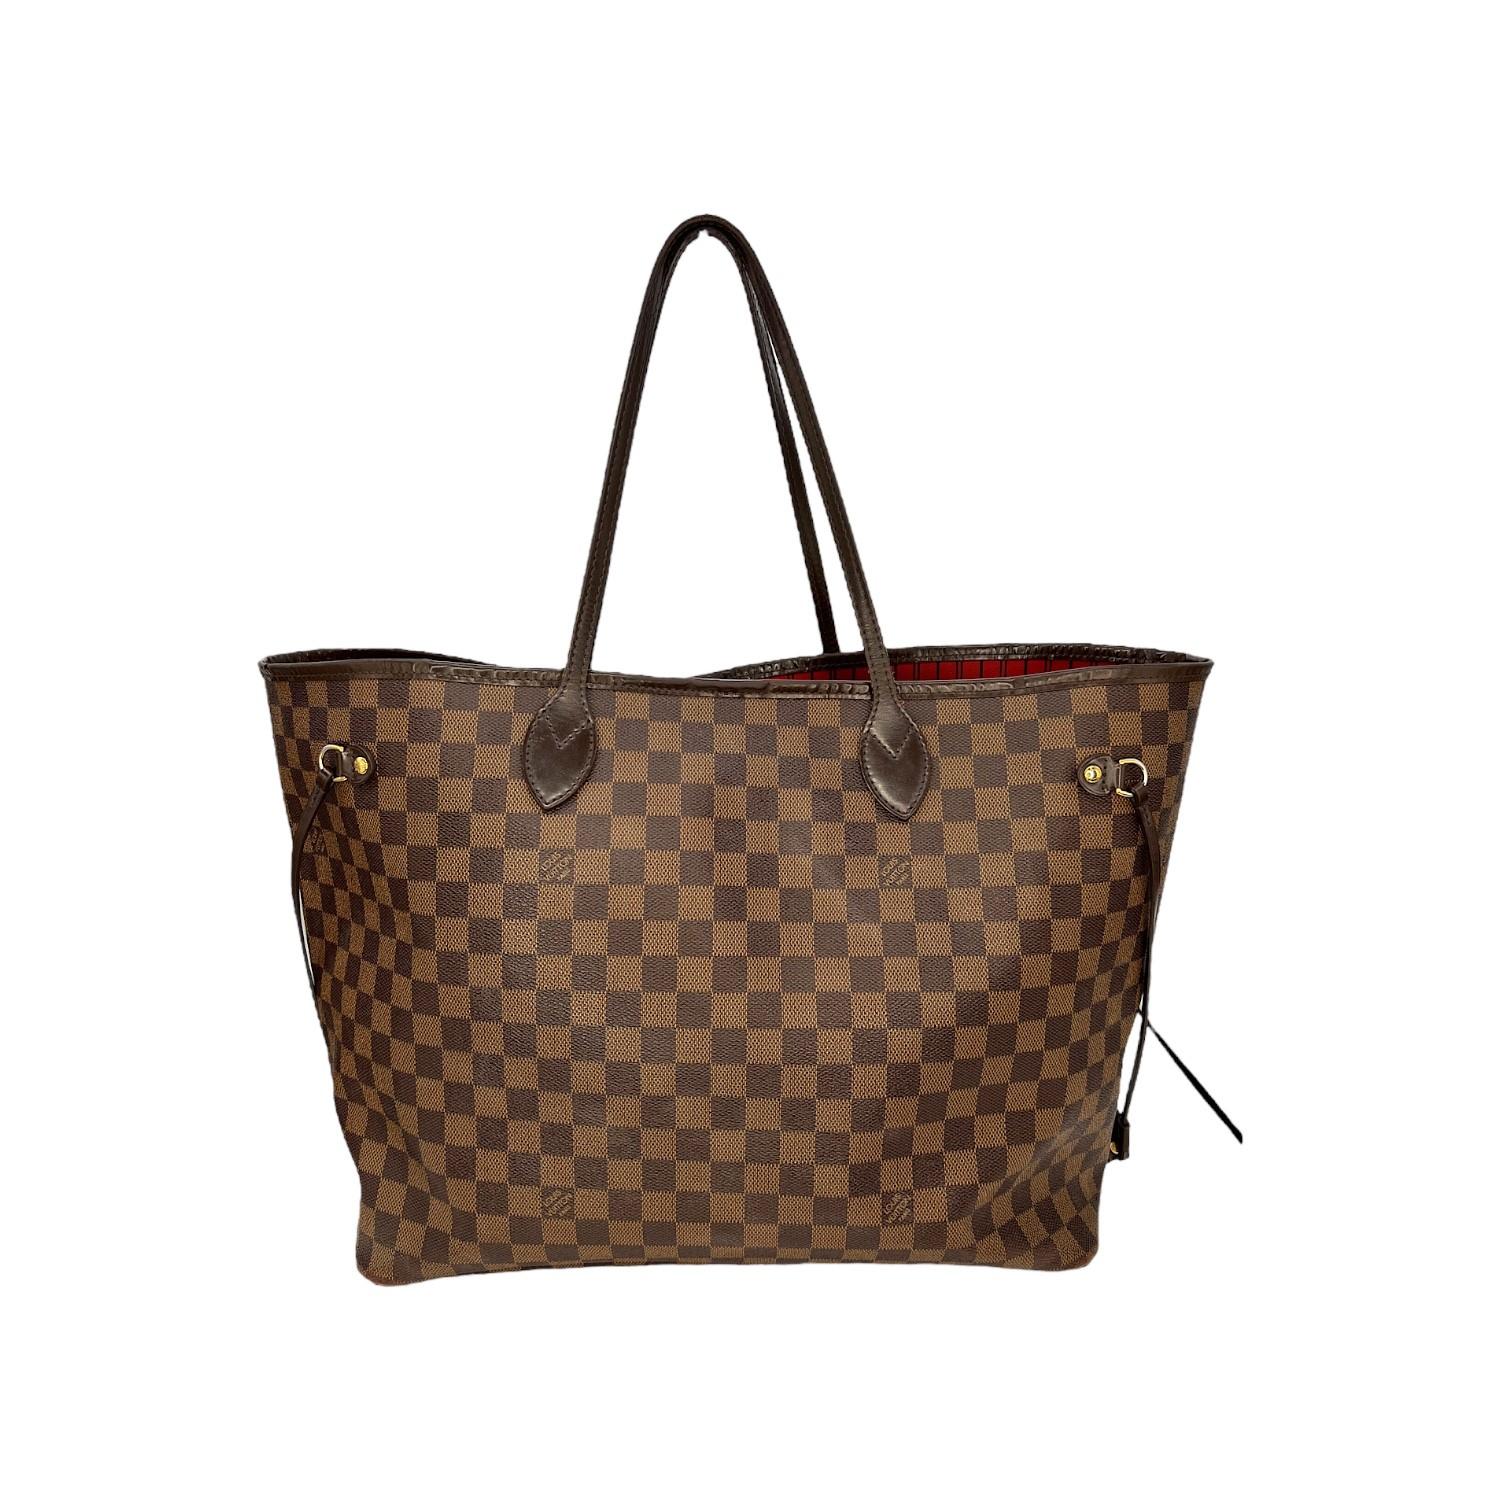 This Louis Vuitton Neverfull GM was made in the USA in 2014 and it is crafted of the classic Louis Vuitton Damier Ebene coated canvas with leather trimming and gold-tone hardware features. It has dual flat leather handles. It has an open top closure